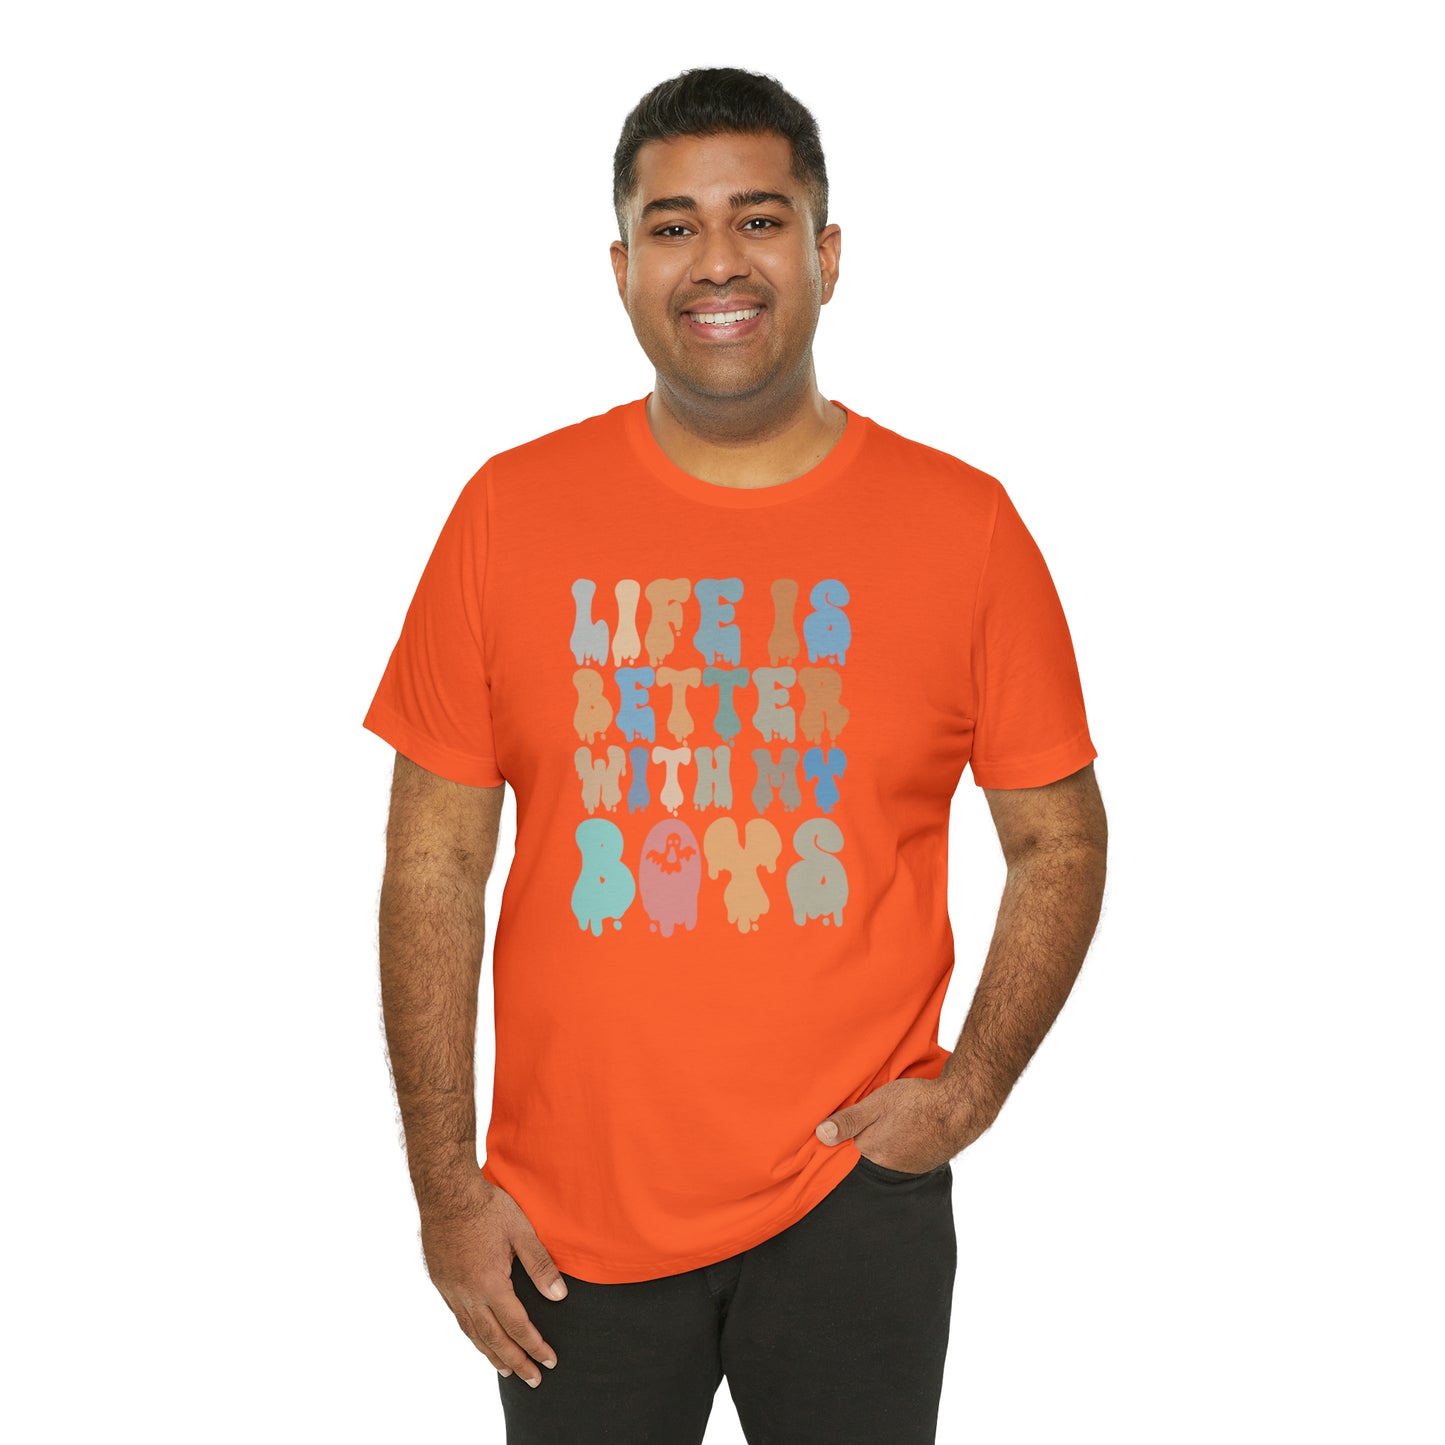 Cute Boy Mom Shirt for Birthday Gift for Mom, Life is better with my boys Shirt for Halloween Gift, T309